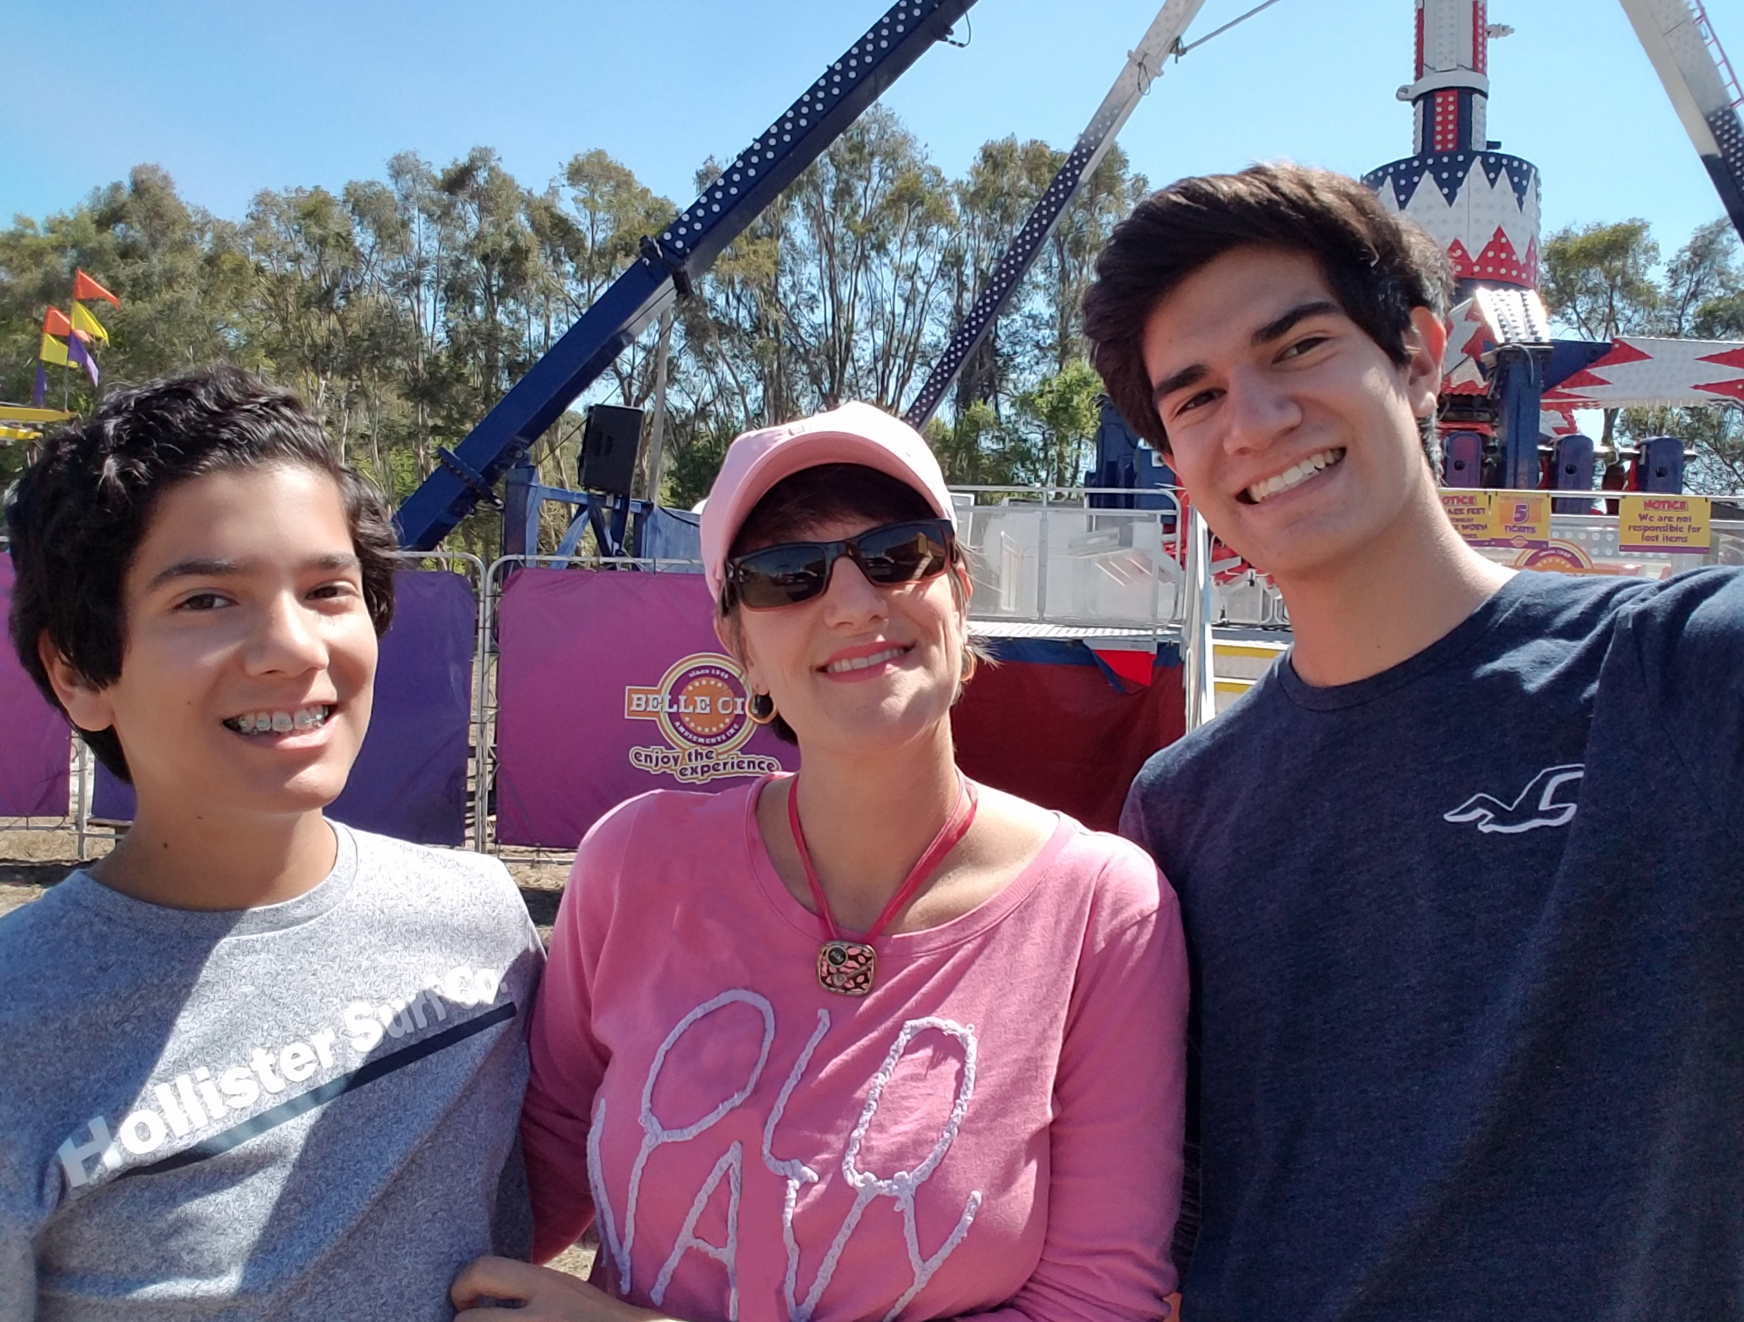 Sharon Kunkel and sons Noah (left) and Max (right) during their annual visit to the Sarasota County Fair